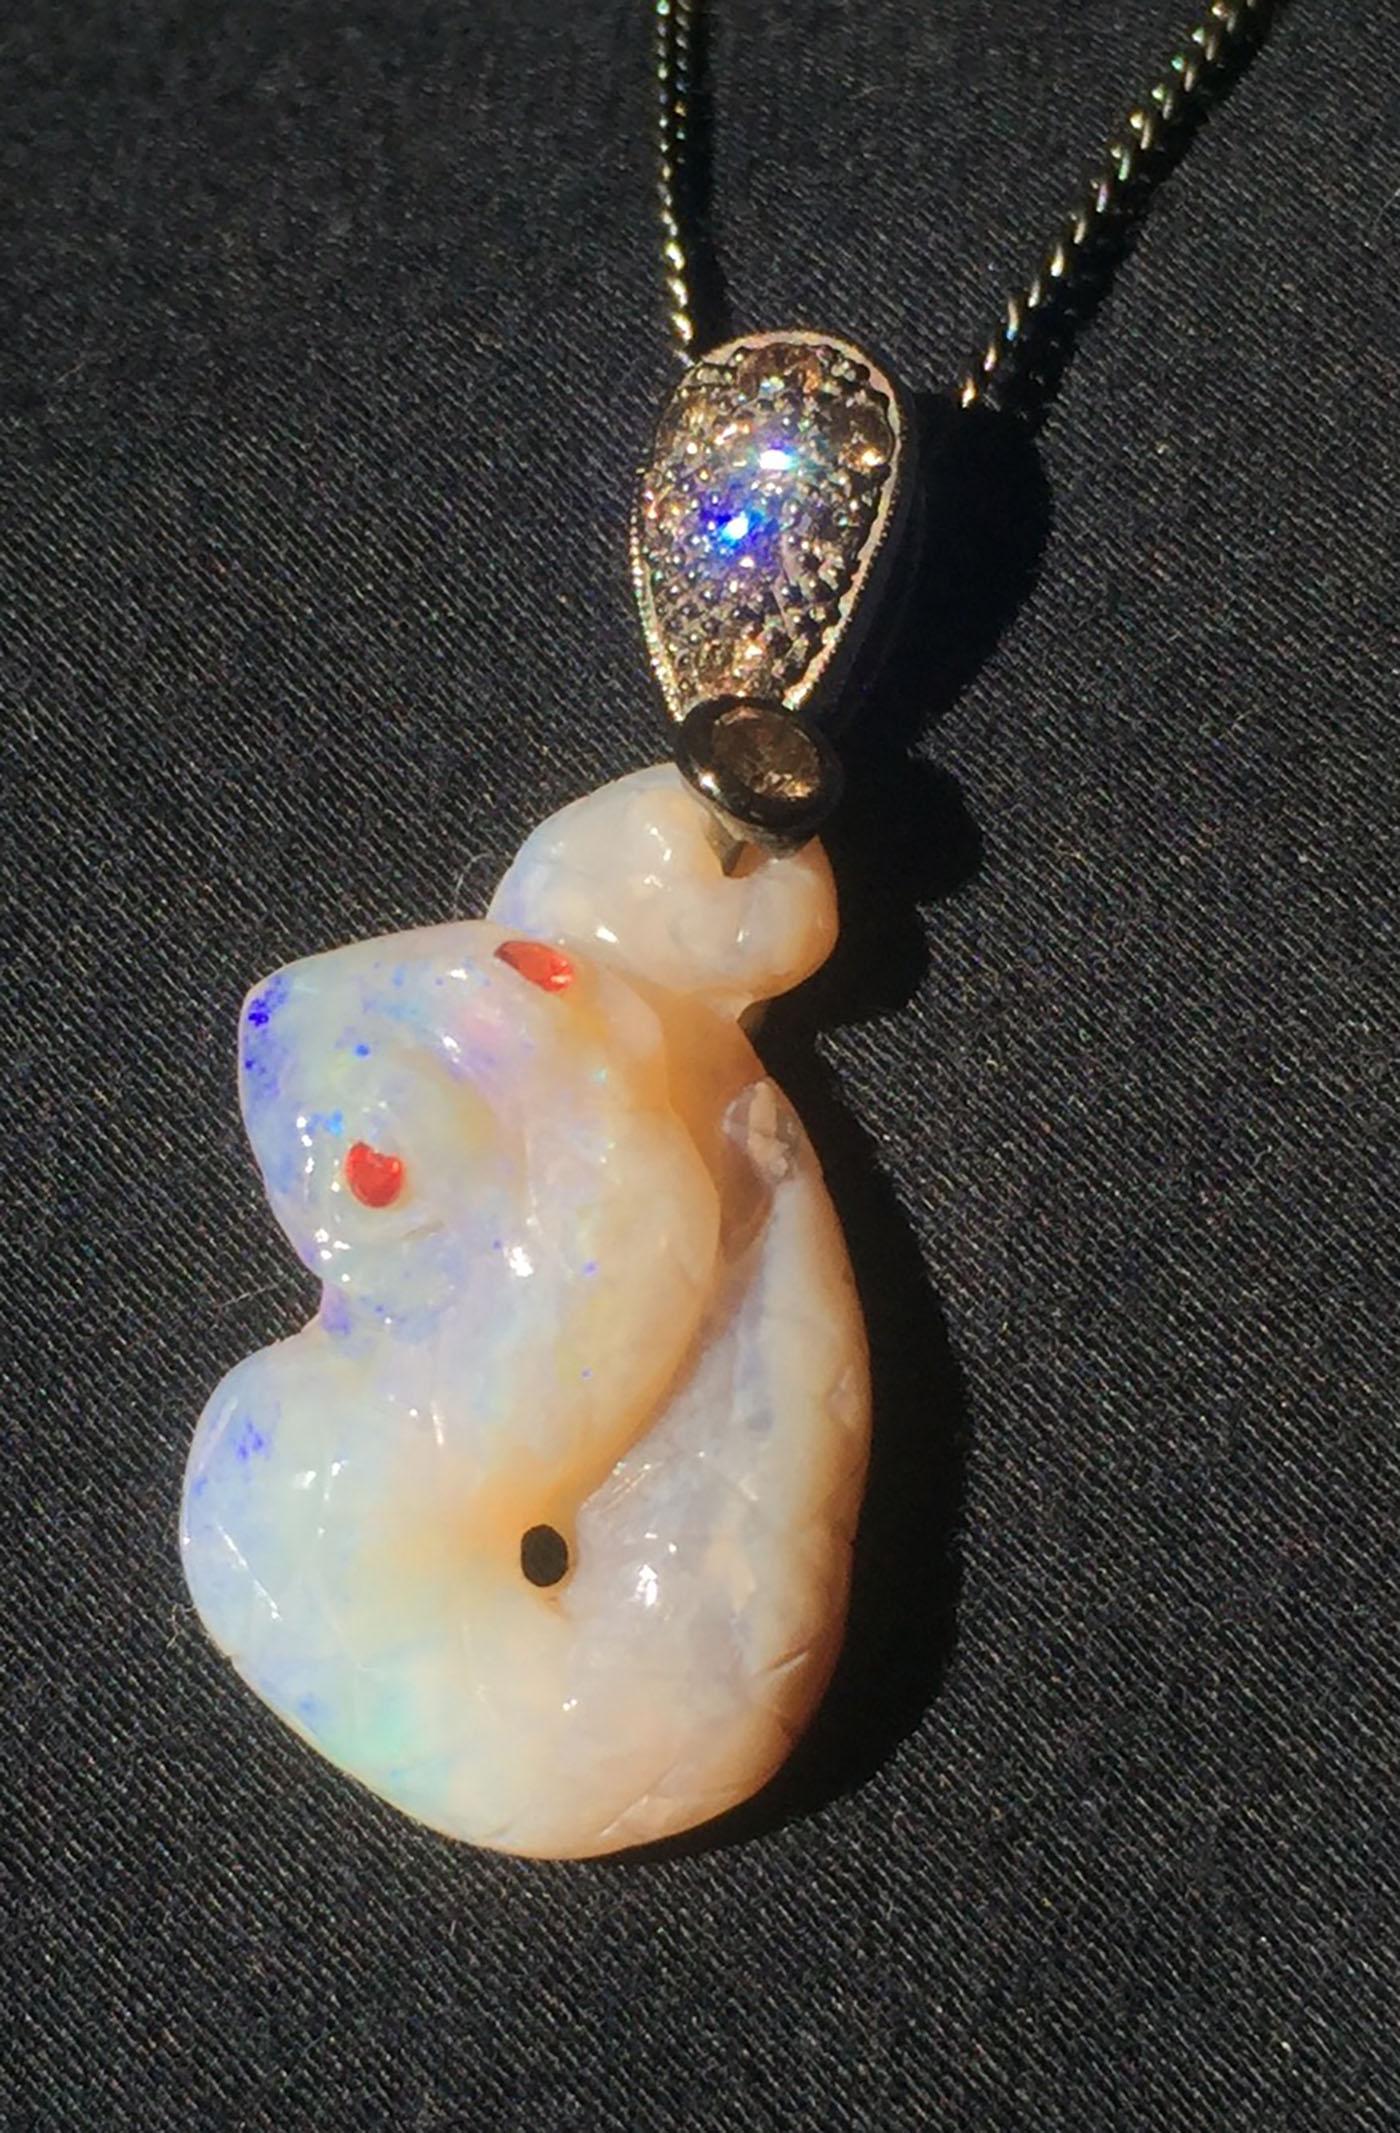 Kary Adam Designed, 14kt Blackened Gold Opal Pendant with Coniac Diamonds, Red Sapphire Eyes in and a Carved Opal Snake. The Pendant hangs from a Blackened SIlver Chain of 18 Inches.

Originally from San Diego, California, Kary Adam lived in the